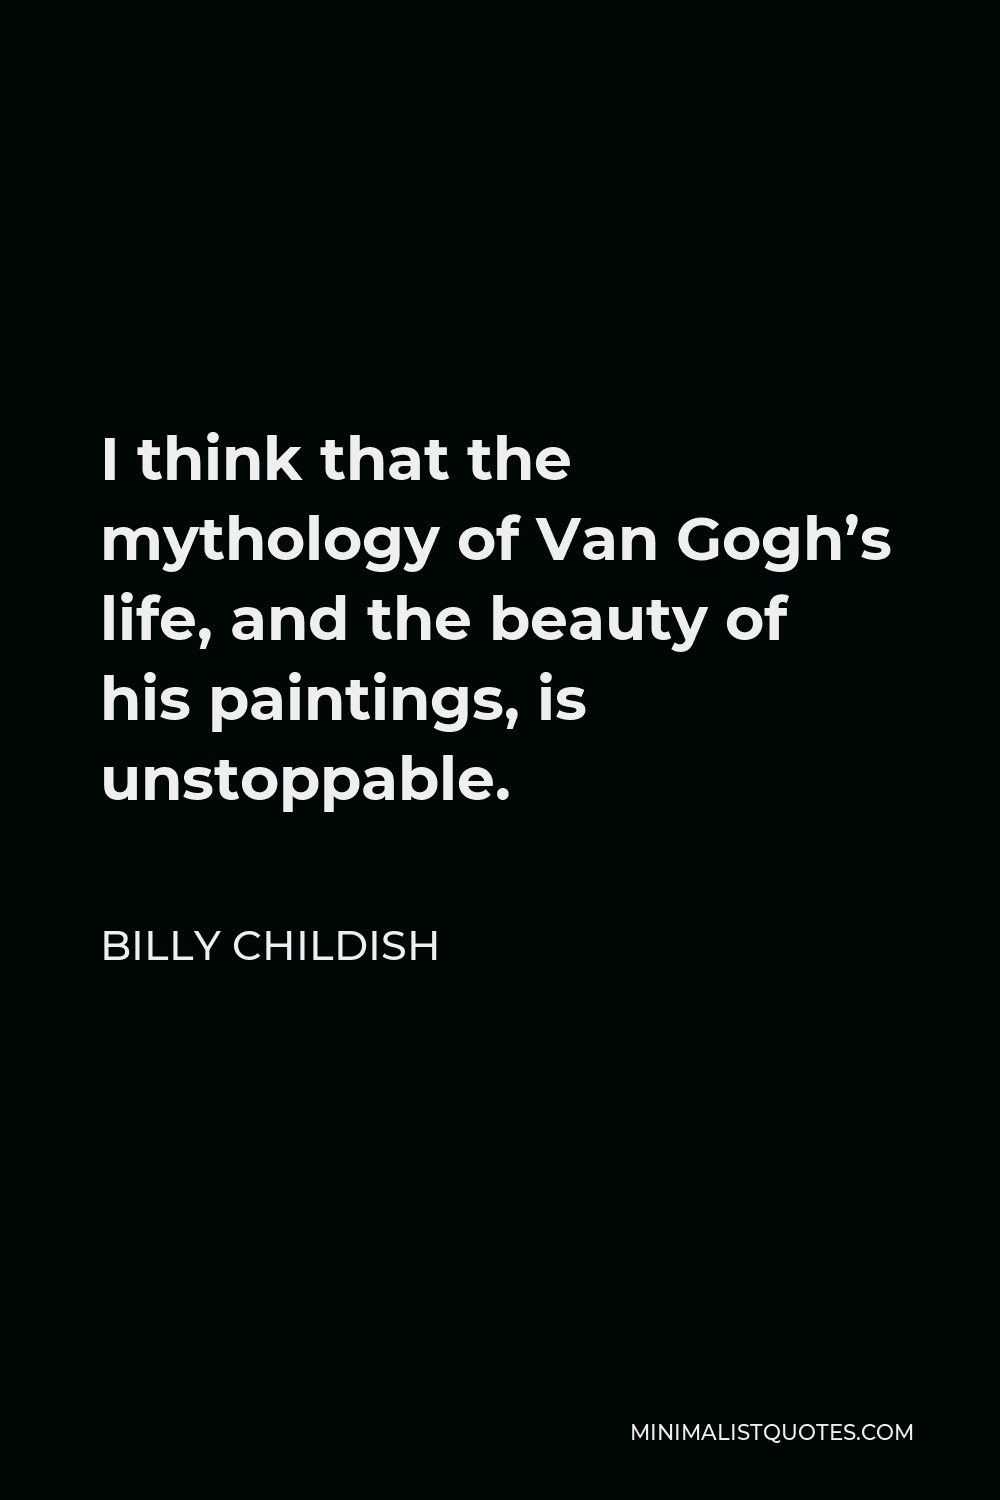 Billy Childish Quote - I think that the mythology of Van Gogh’s life, and the beauty of his paintings, is unstoppable.